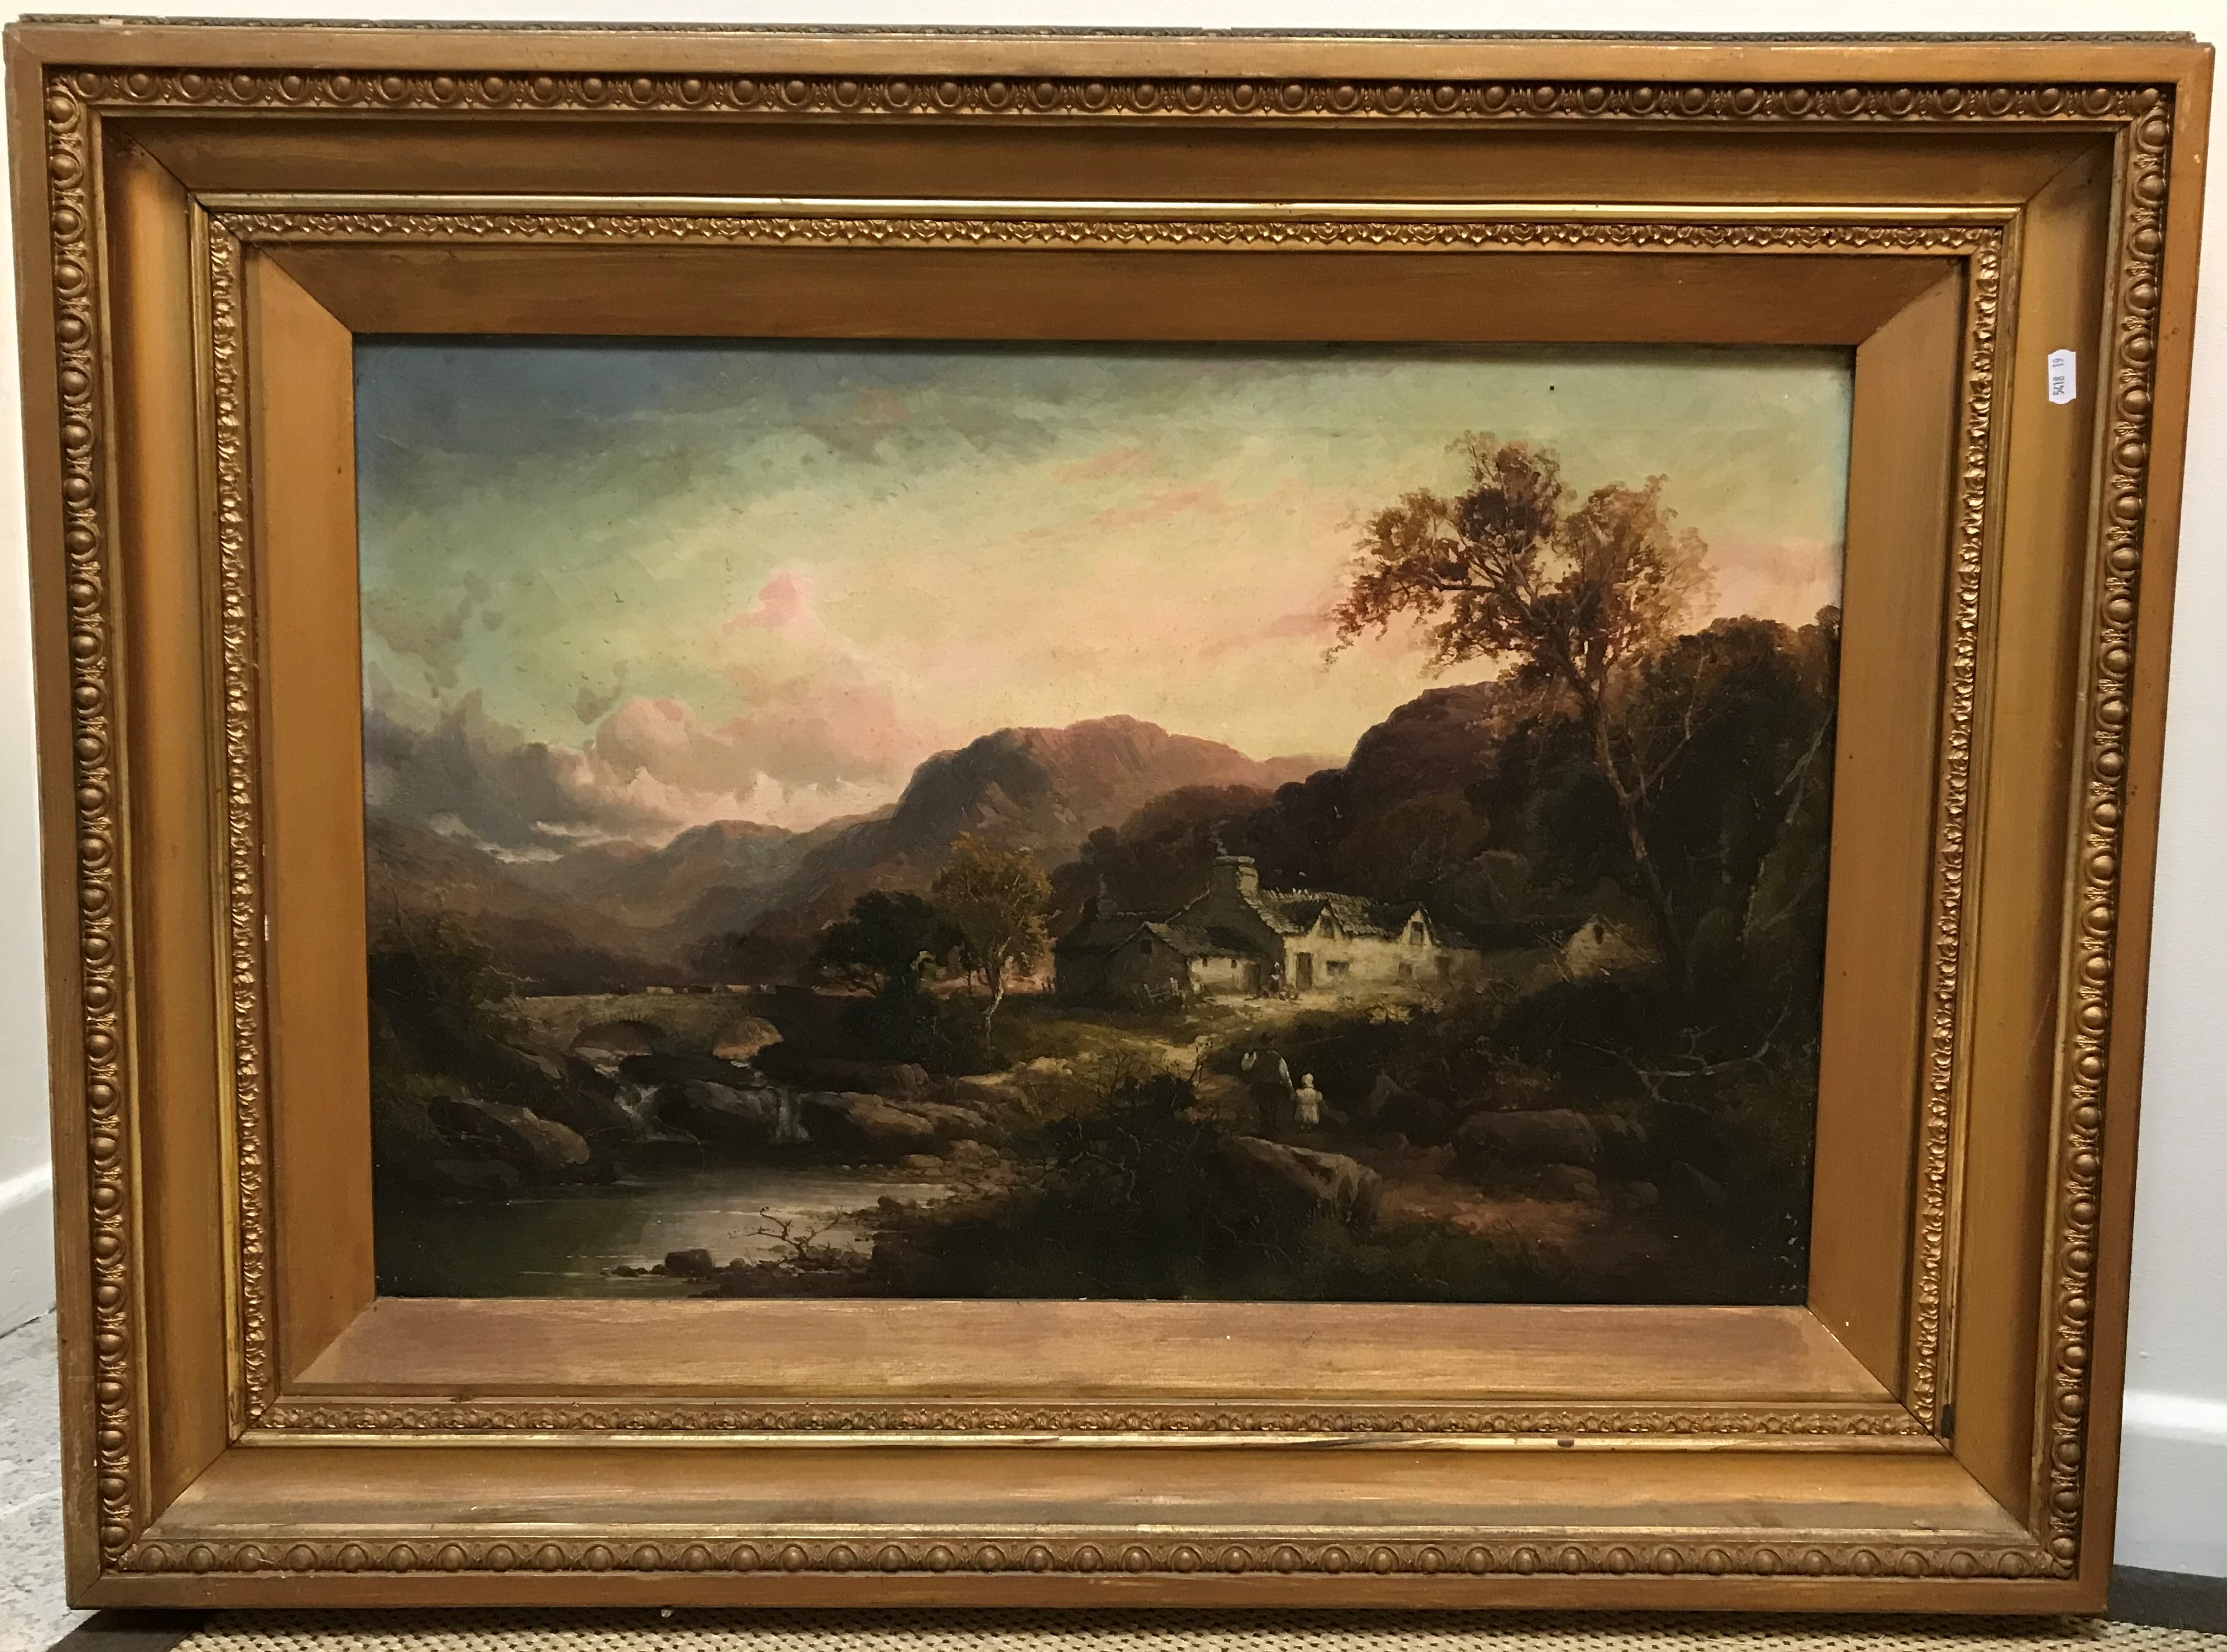 THOMAS SEYMOUR "Mountainous landscape with figures by stone cottage in foreground", oil on canvas,